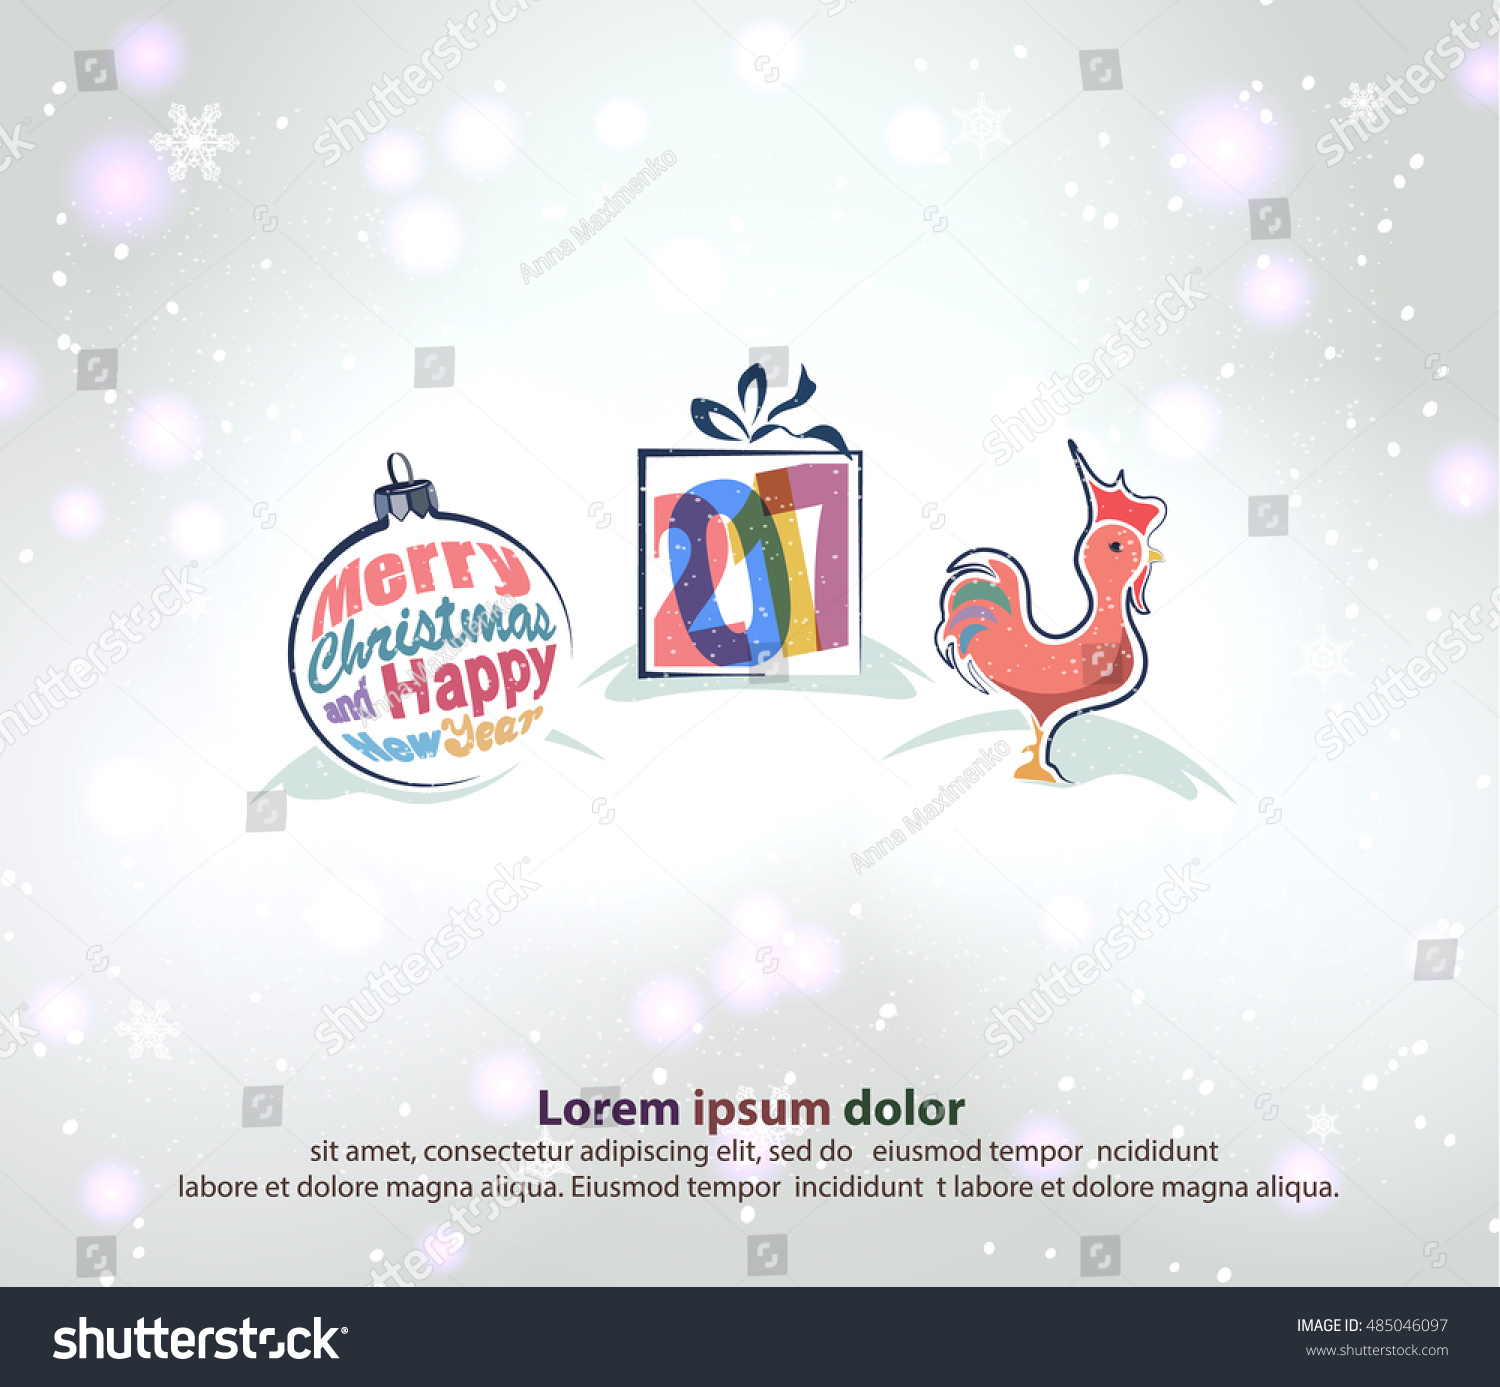 Merry Christmas and Happy New Year border in a shape of three main symbols such as